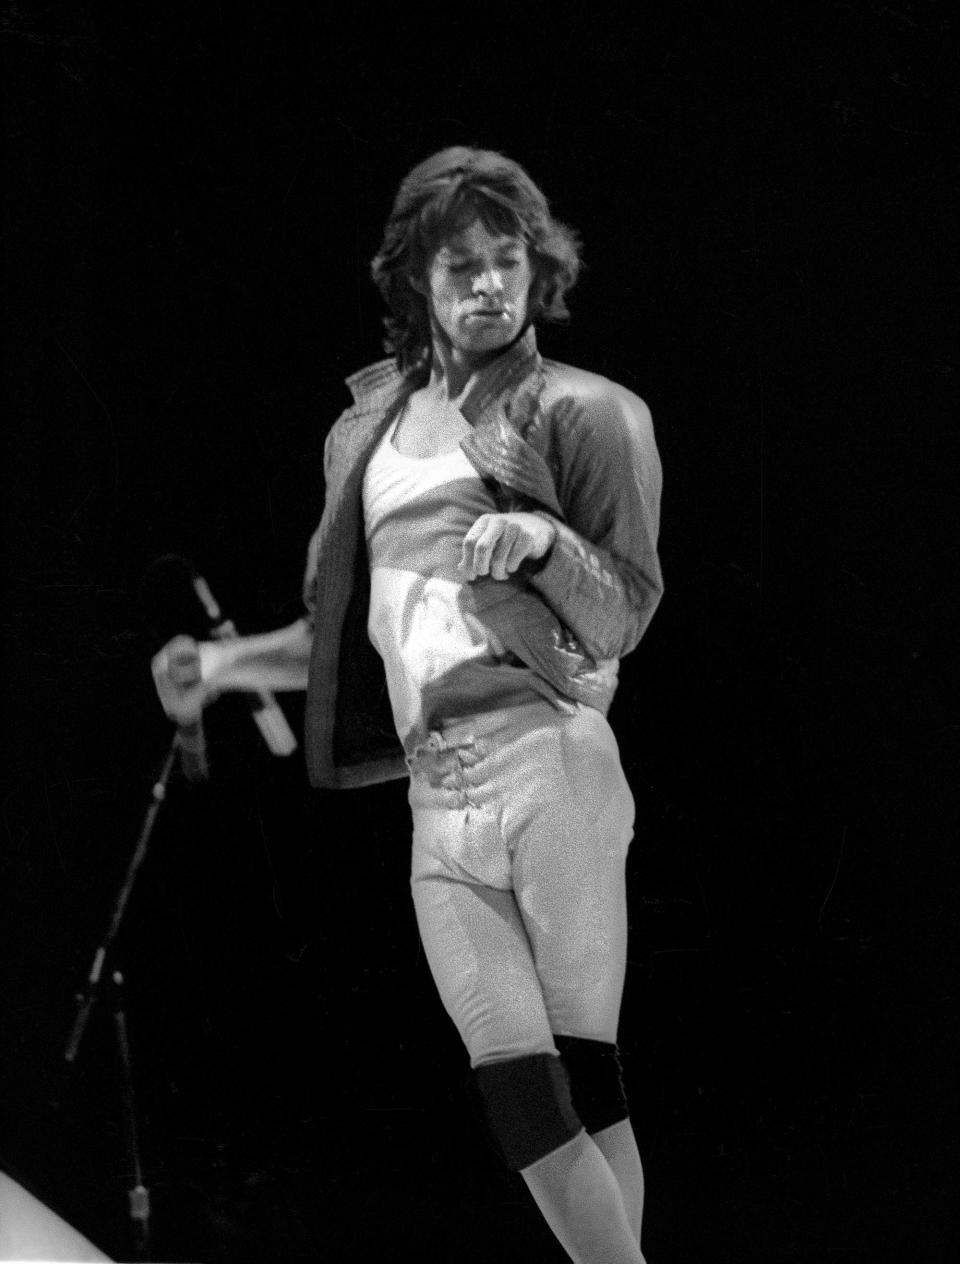 Mick Jagger and The Rolling Stones performs at Brendan Byrne Arena in East Rutherford, NJ on November 5, 1981.